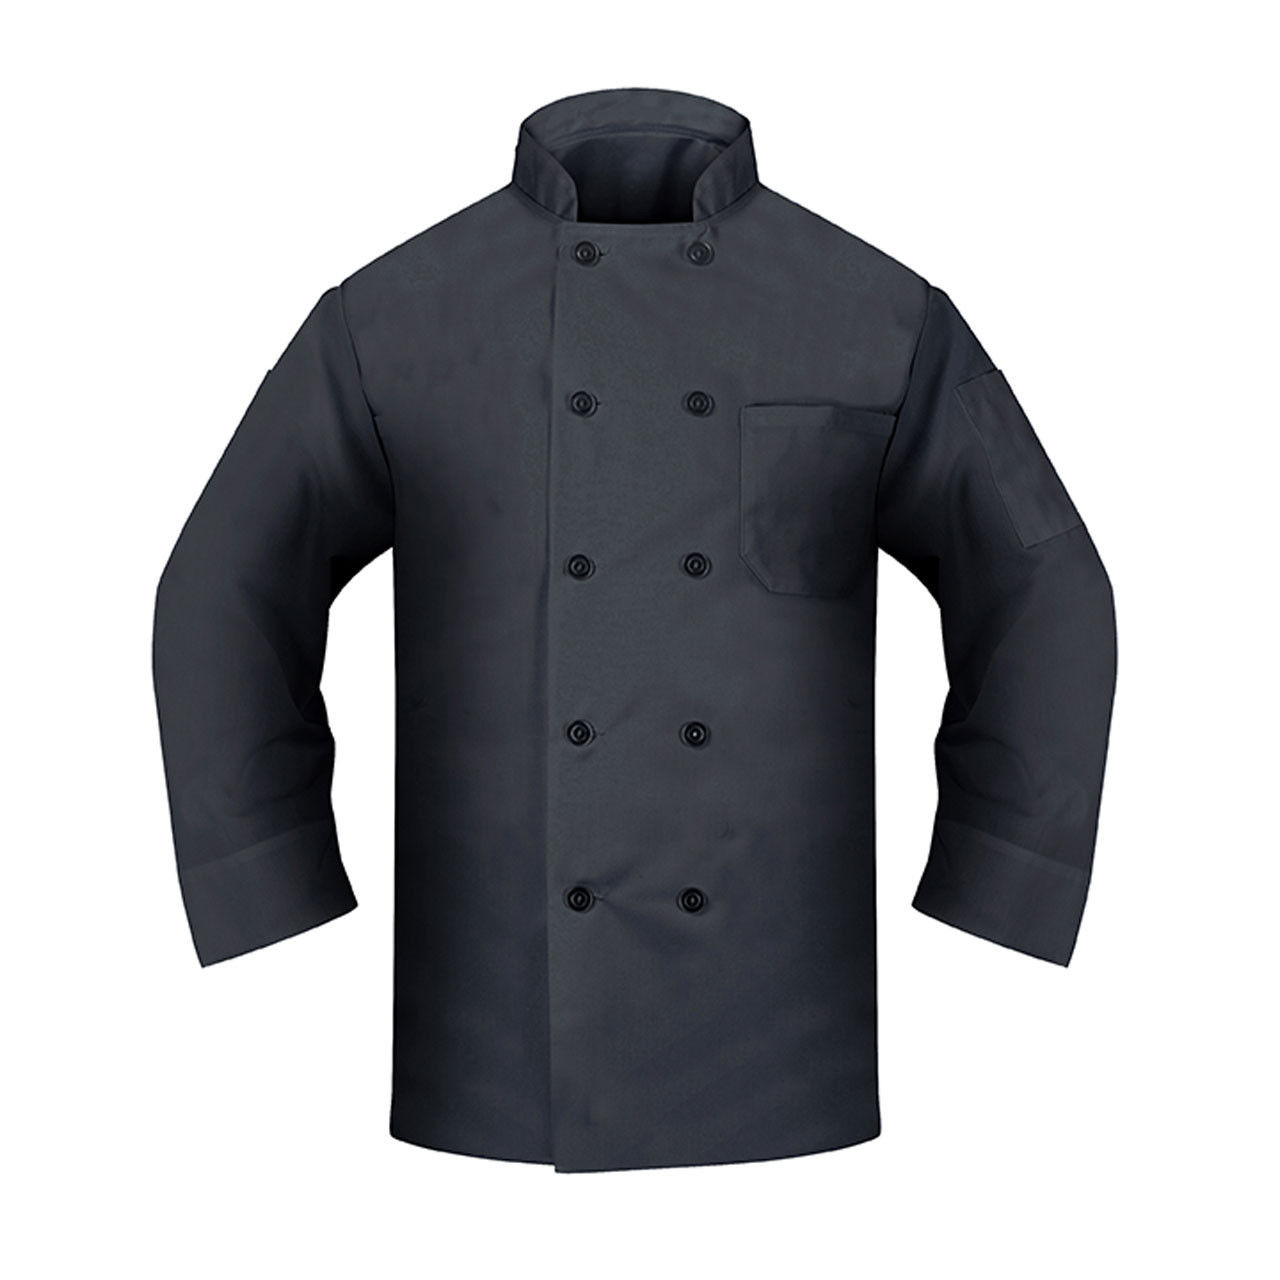 What is the cuff style of the black chef coats I'm planning to buy?